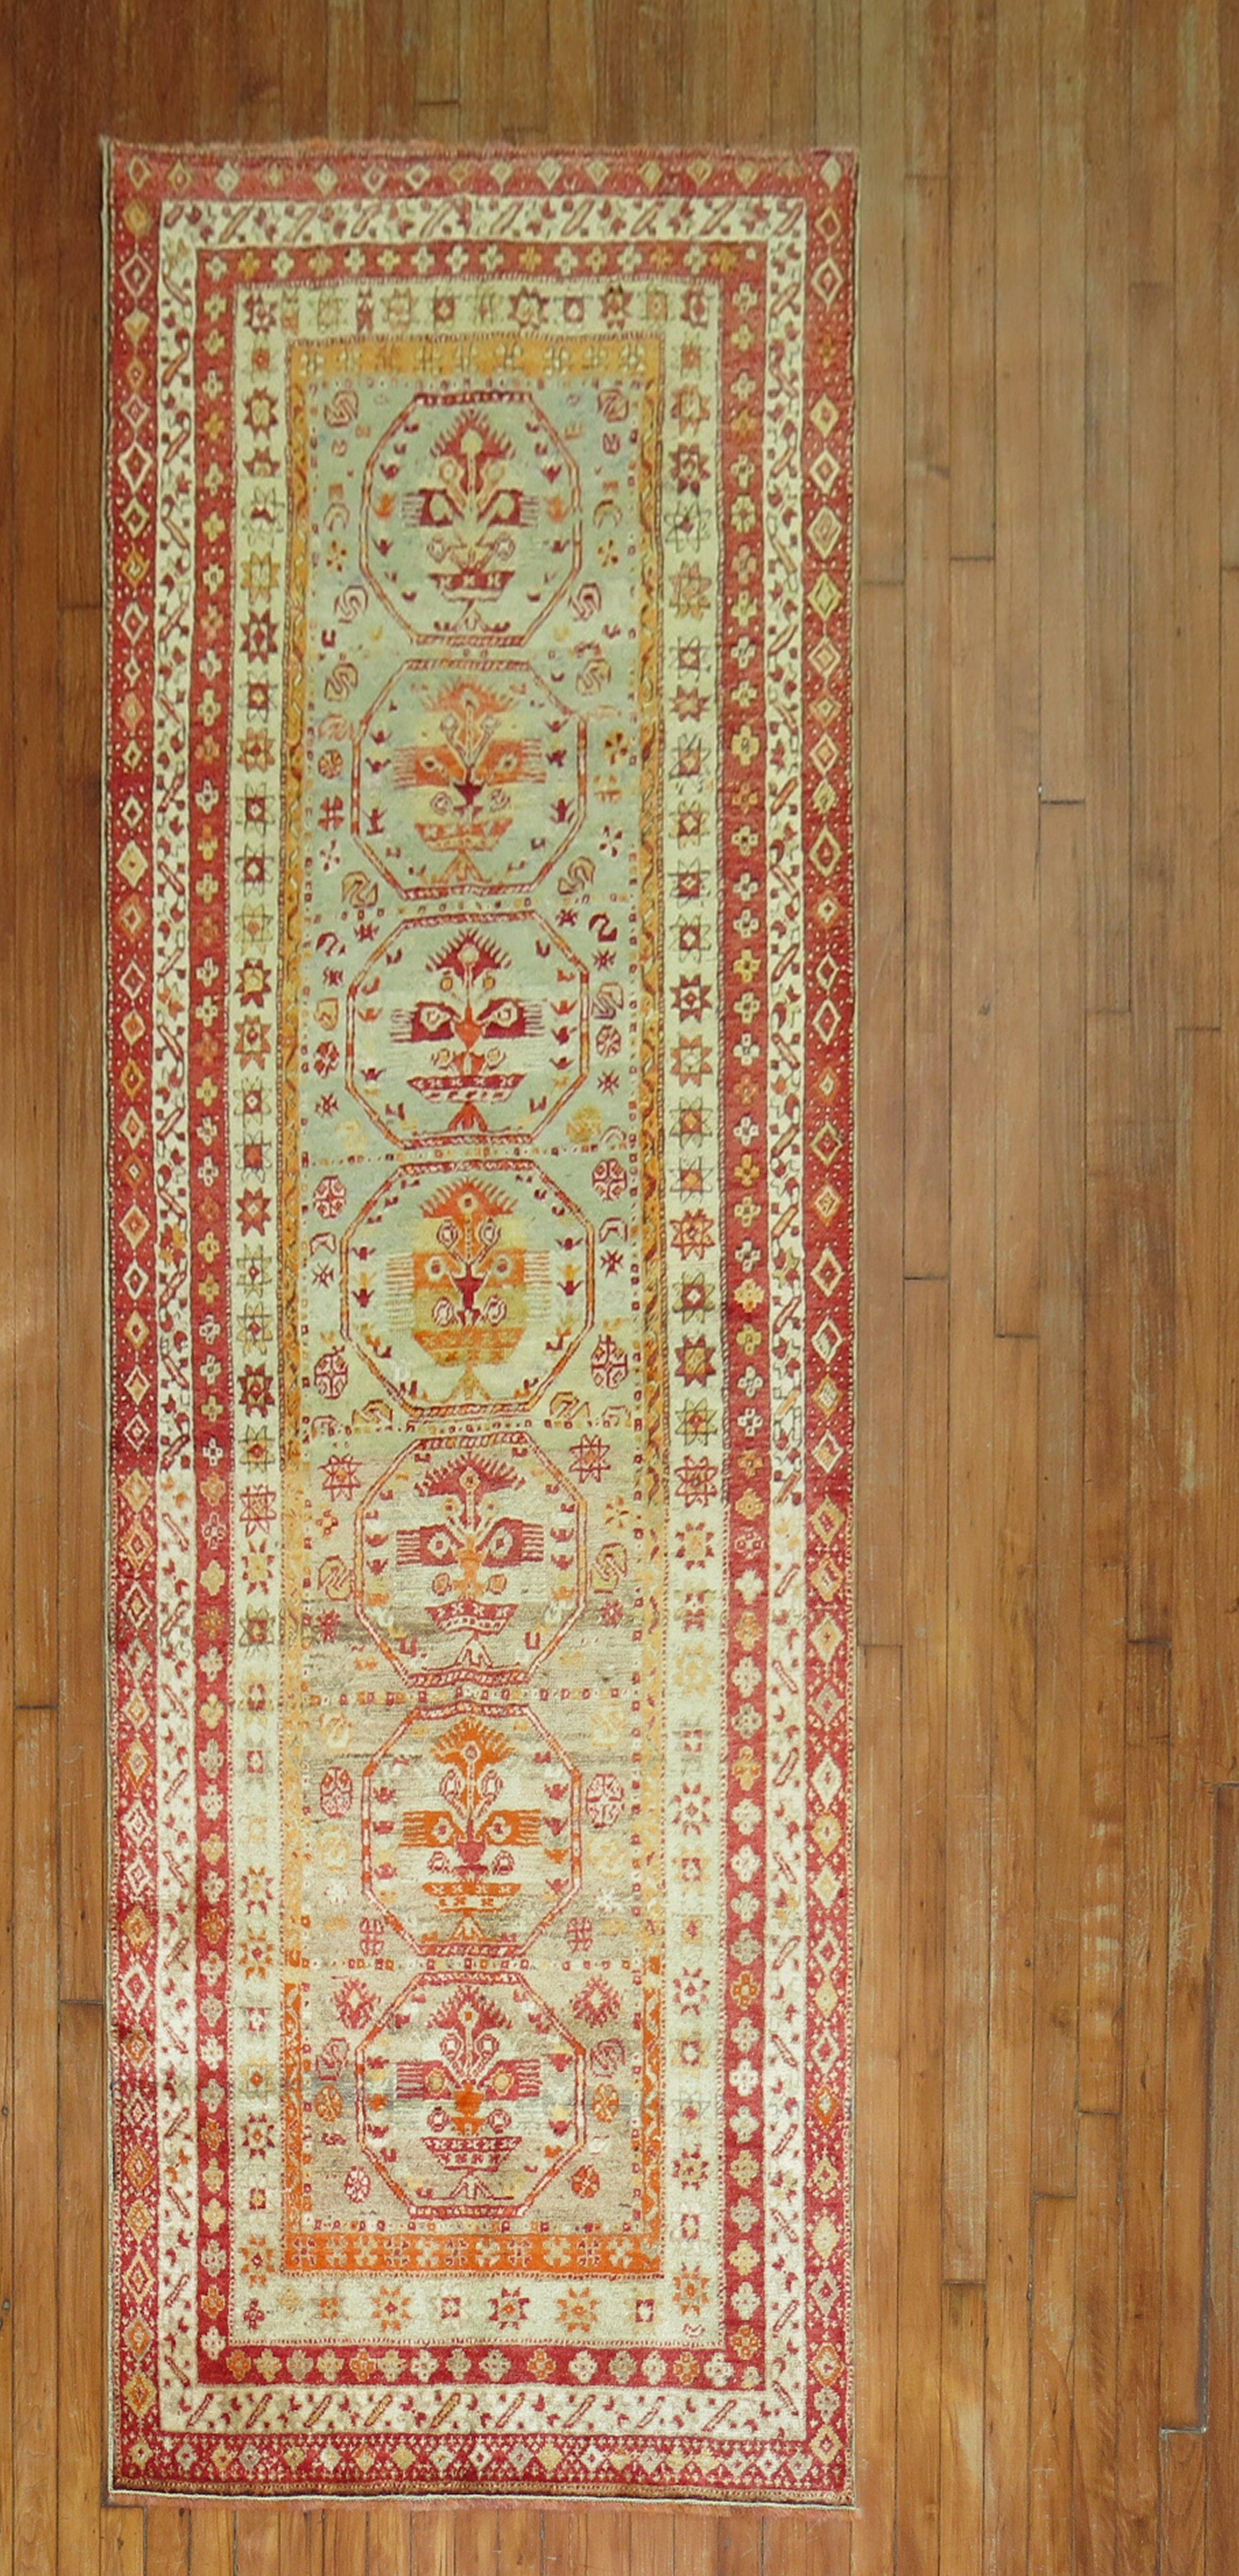 An early 20th-century fine colorful Turkish Sivas runner

Measures: 3'3'' x 9'1''.